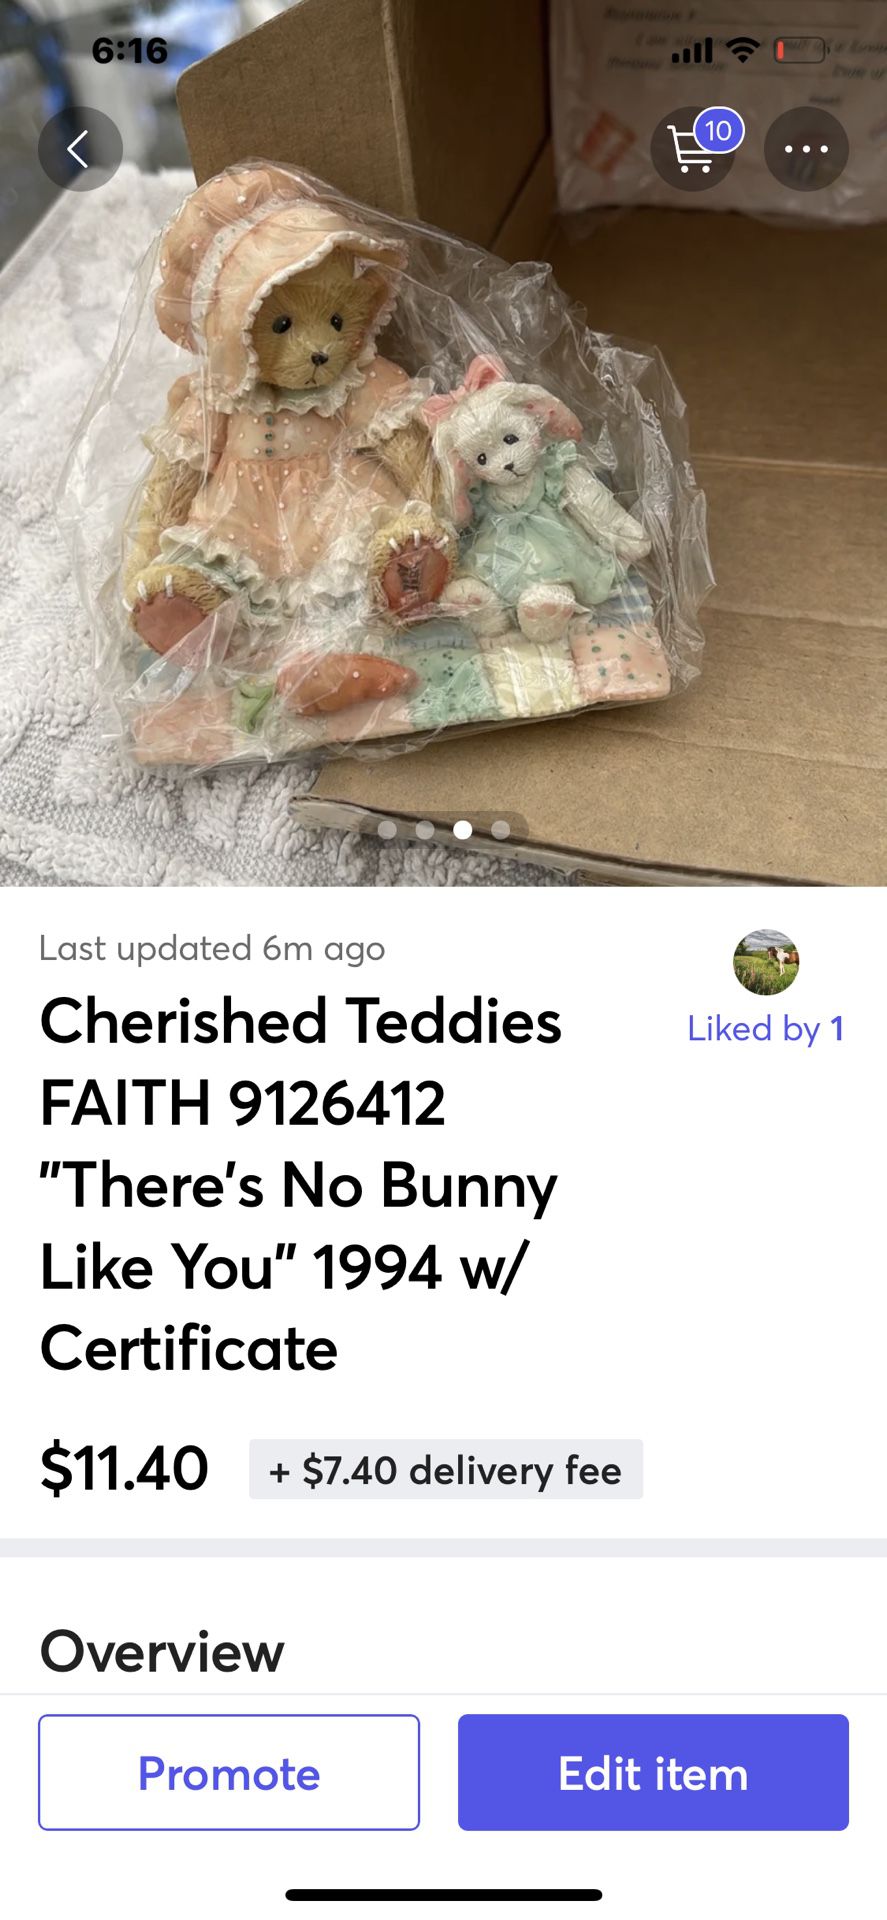 Cherished Teddies FAITH (contact info removed) "There's No Bunny Like You" 1994 w/Certificate